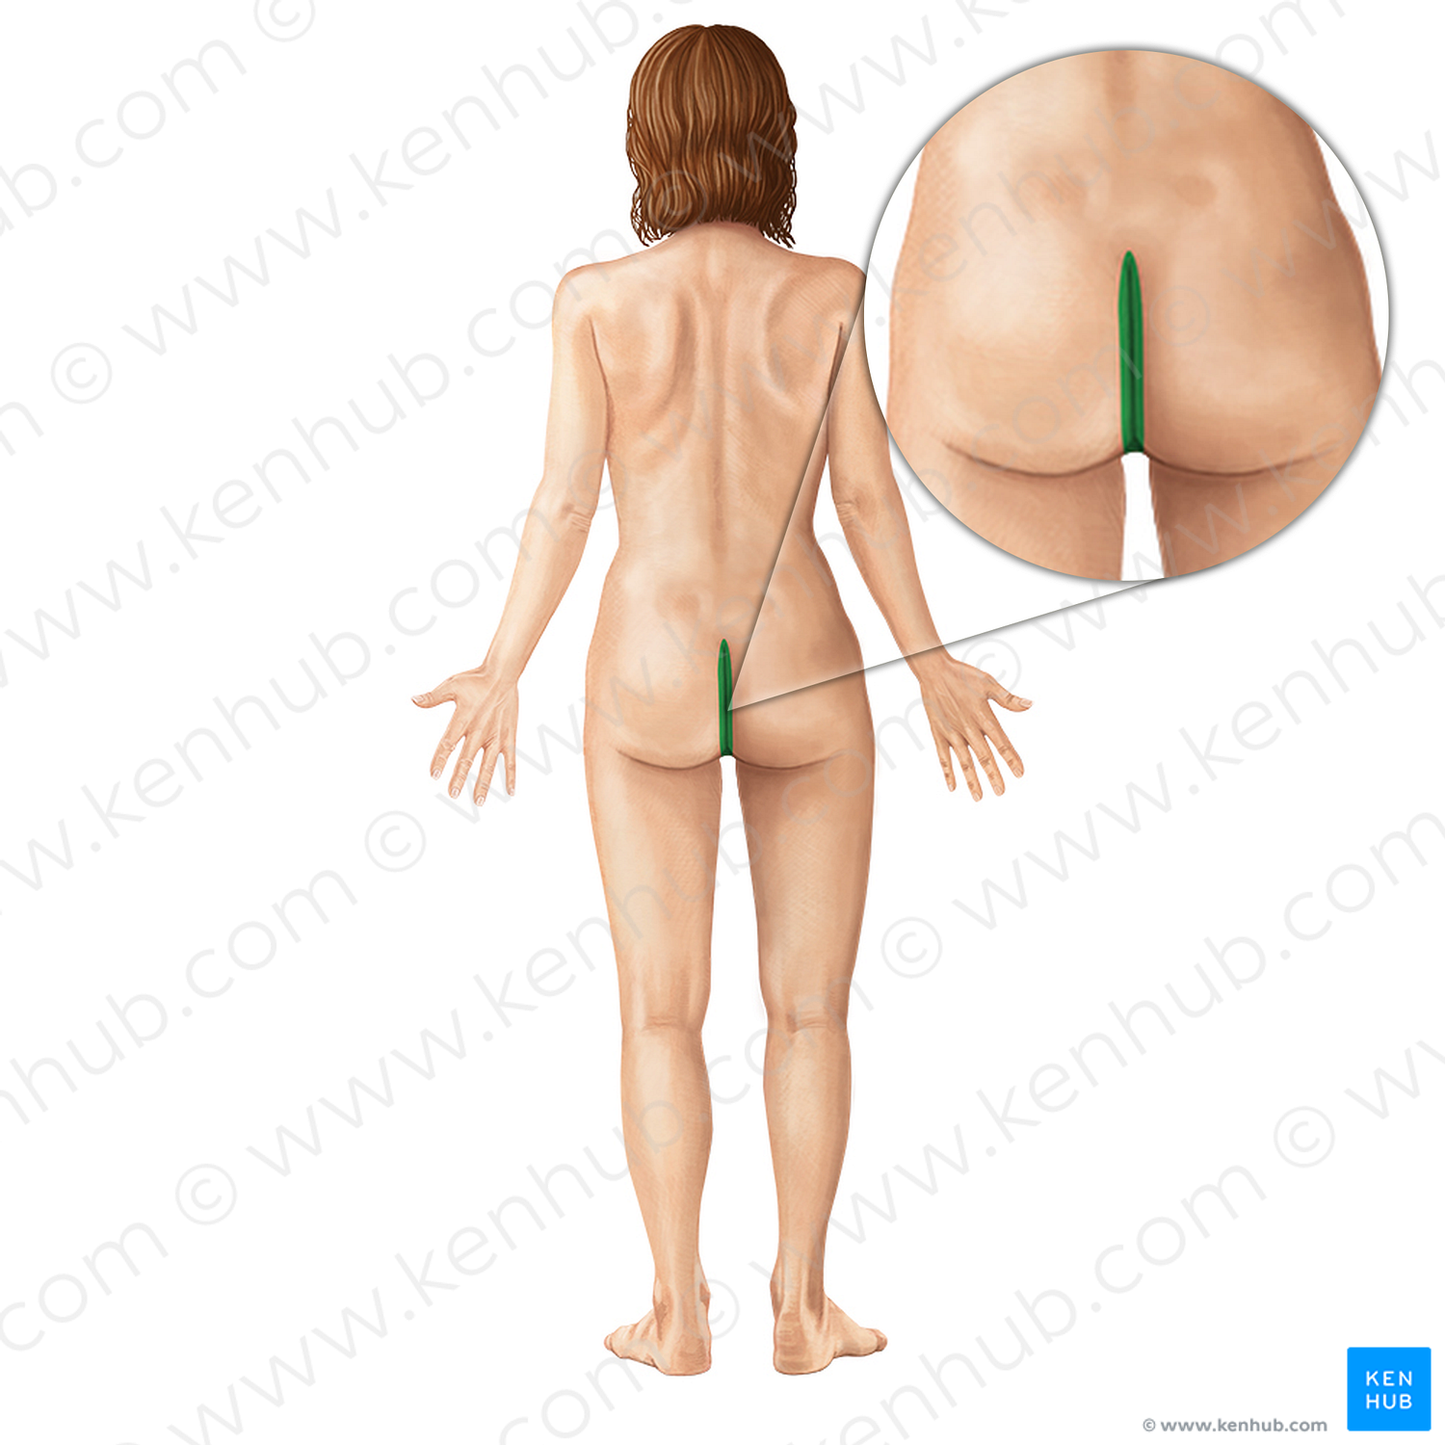 Intergluteal cleft (#3090)